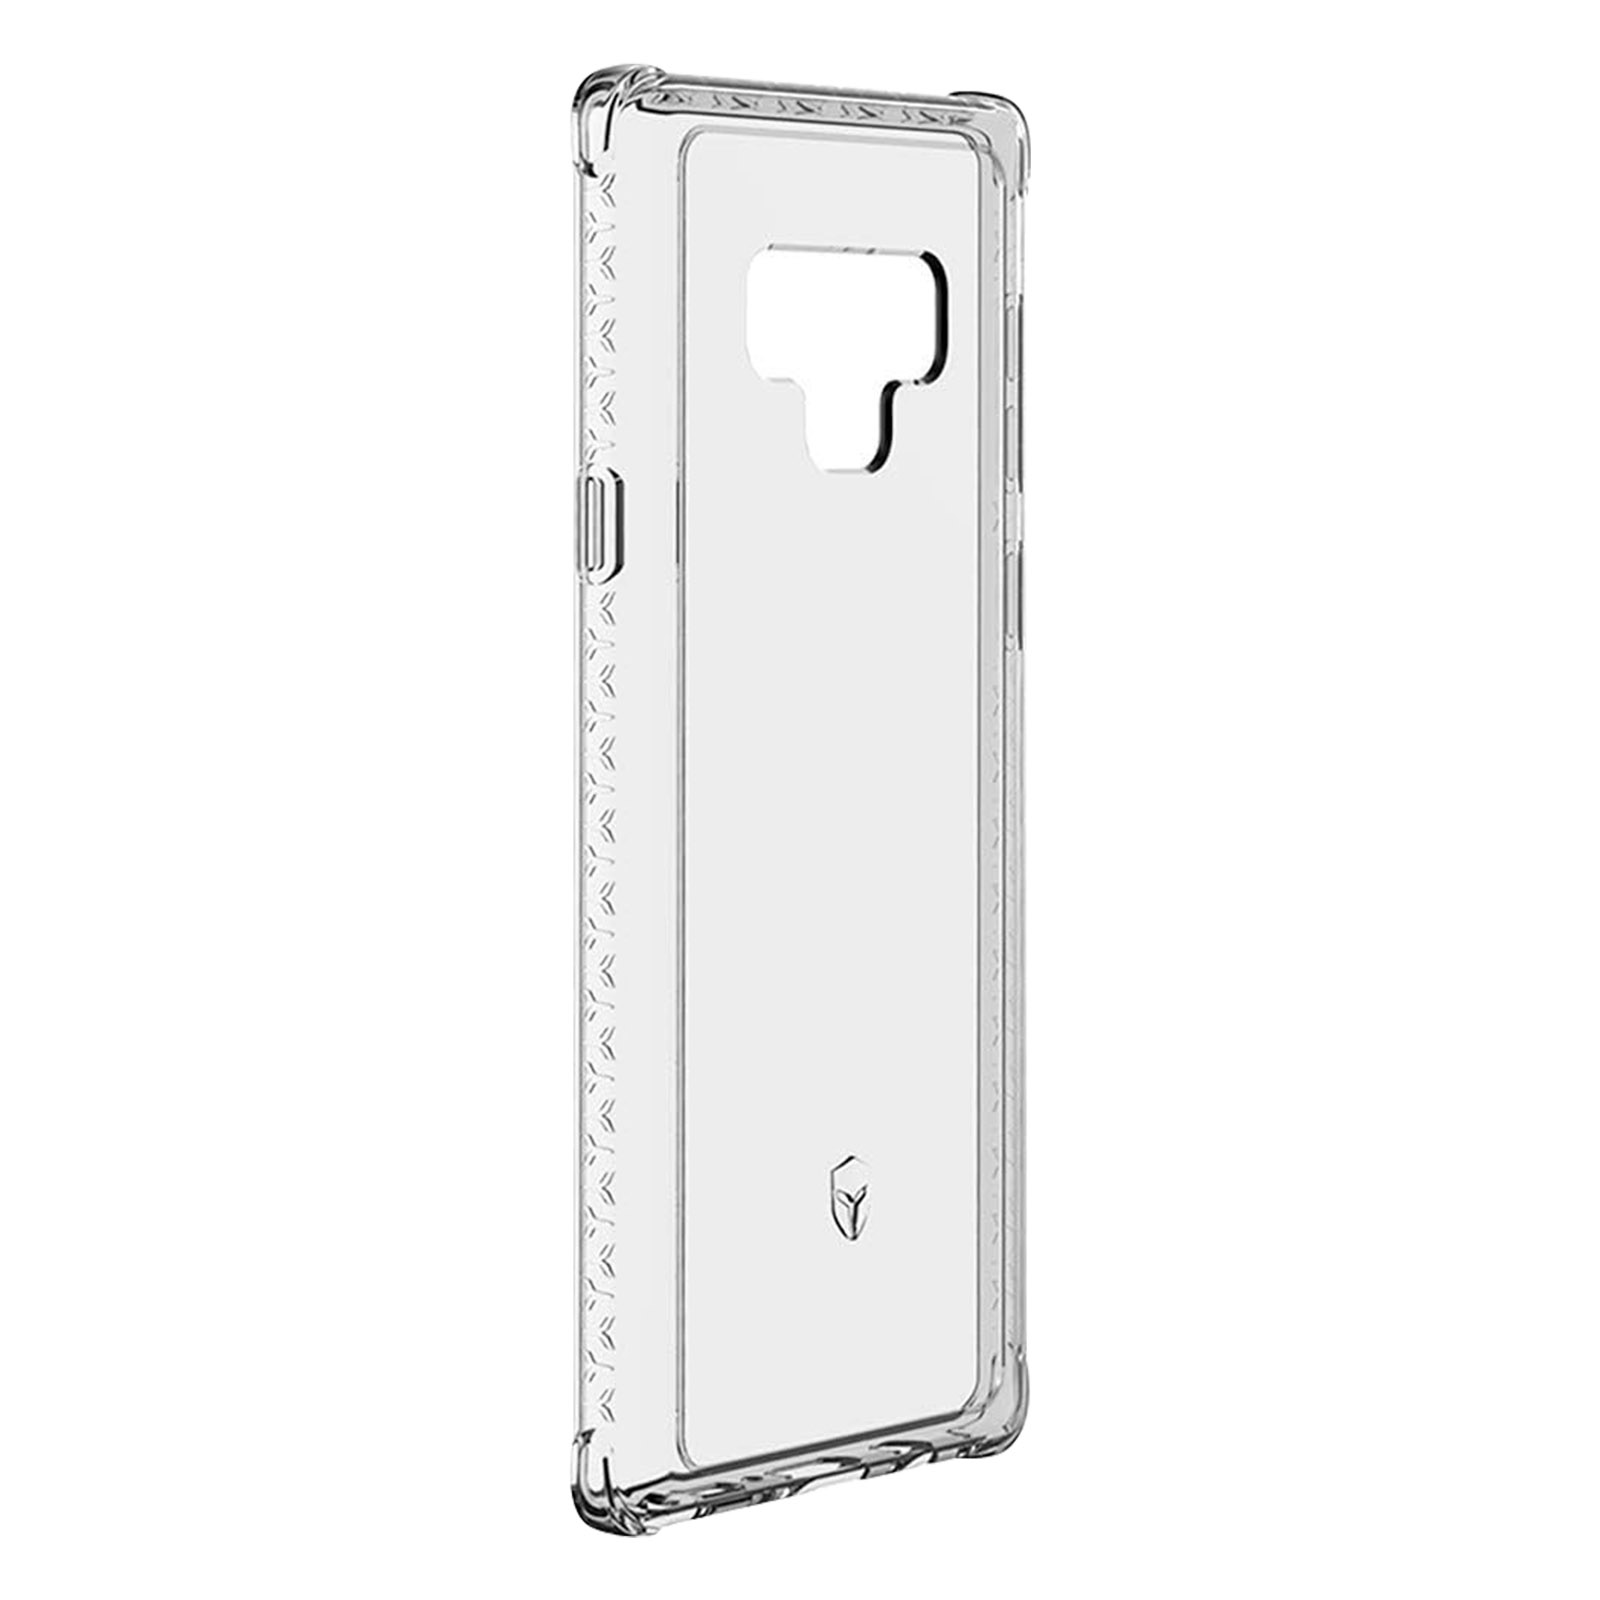 FORCE CASE Air Handyhülle Series, Galaxy Transparent Samsung, Backcover, Note 9